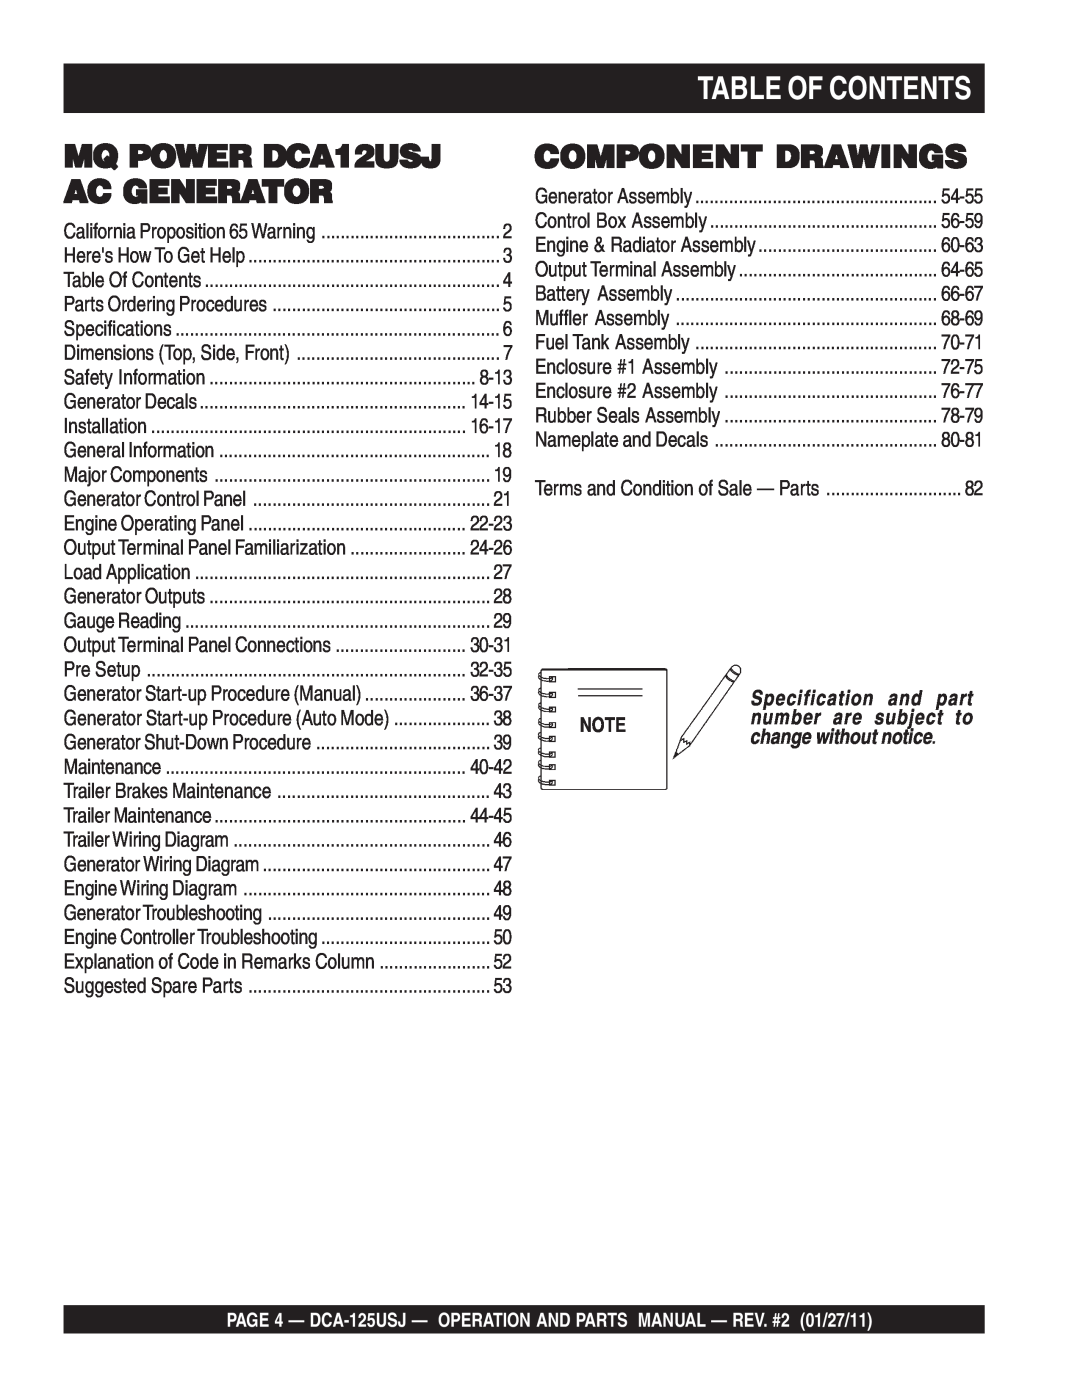 Multiquip DCA125USJ Table Of Contents, Specification and part, NOTEnumber are subject to change without notice 